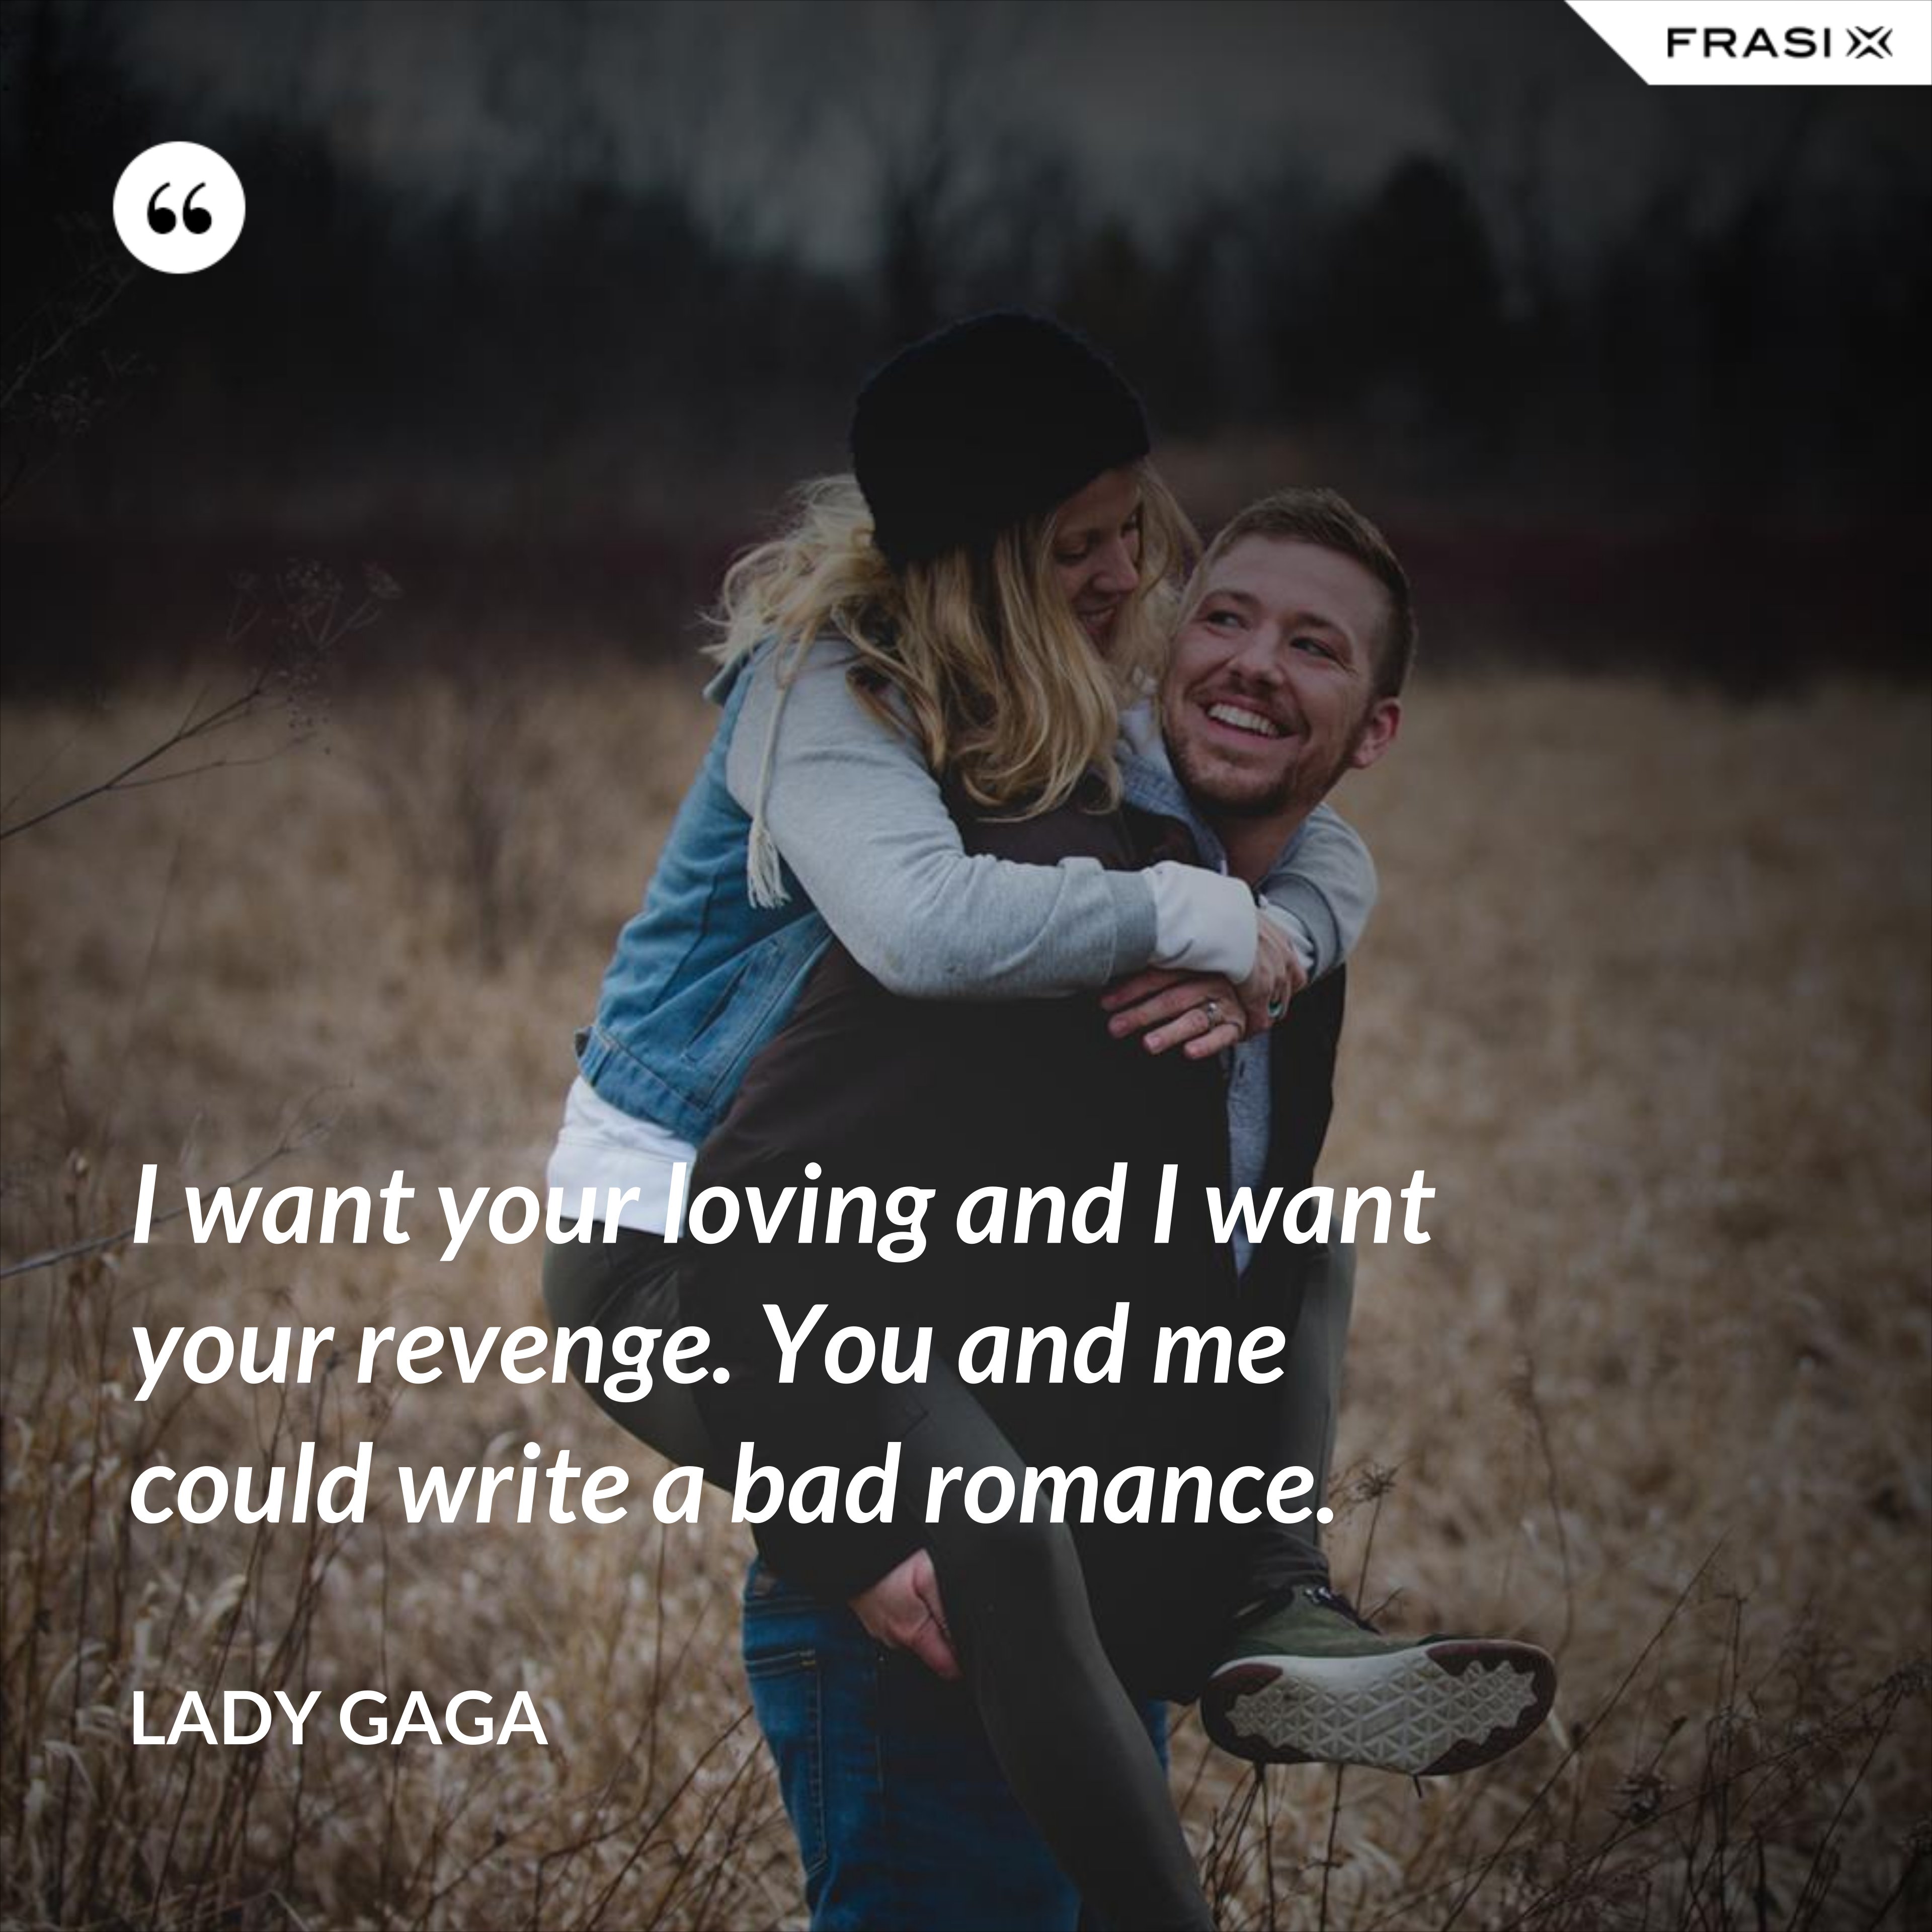 I want your loving and I want your revenge. You and me could write a bad romance. - Lady Gaga